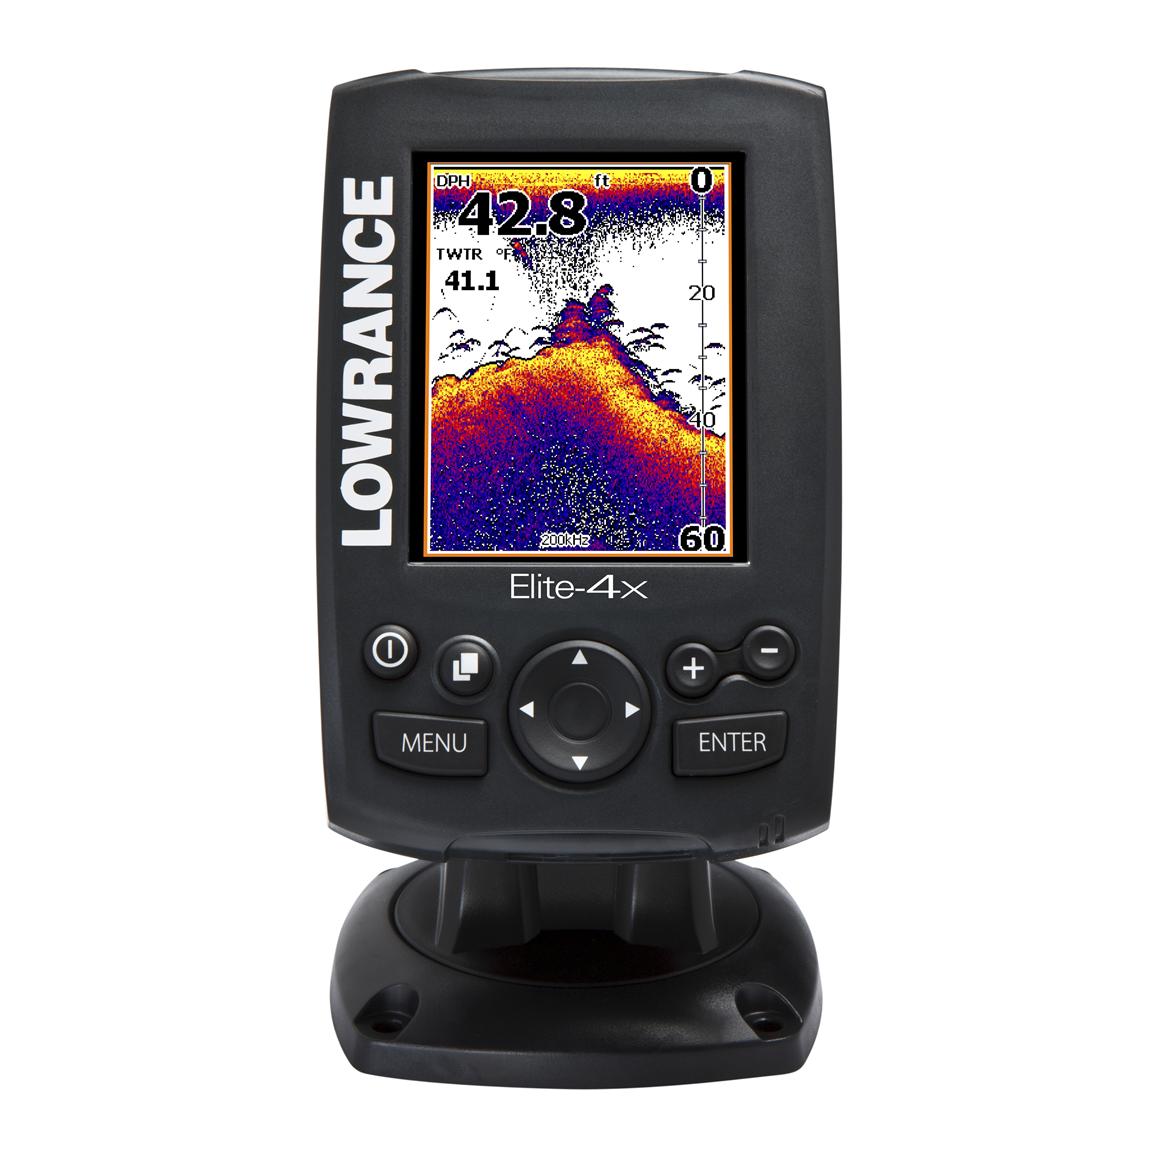 LowranceÂ® Elite - 4x Color Fishfinder with 83 / 200 kHz Transducer - 221194, Fish Finders at 